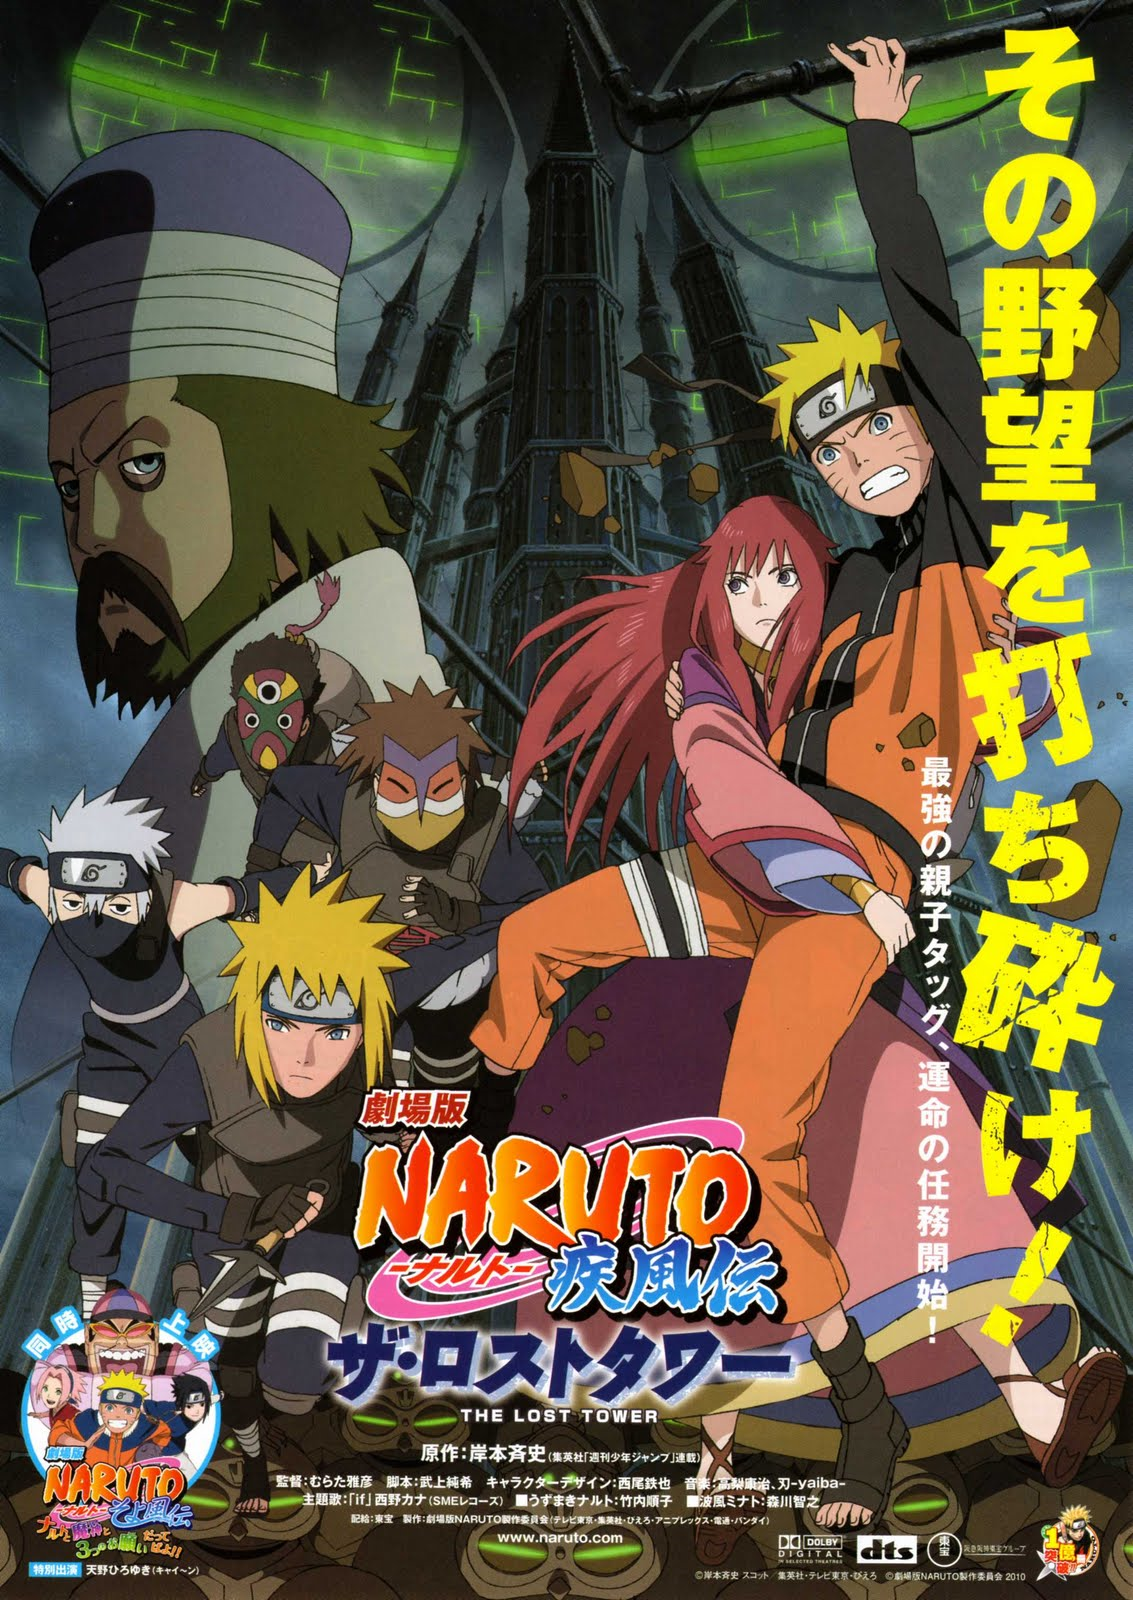 Characters appearing in Road to Ninja: Naruto the Movie (Light